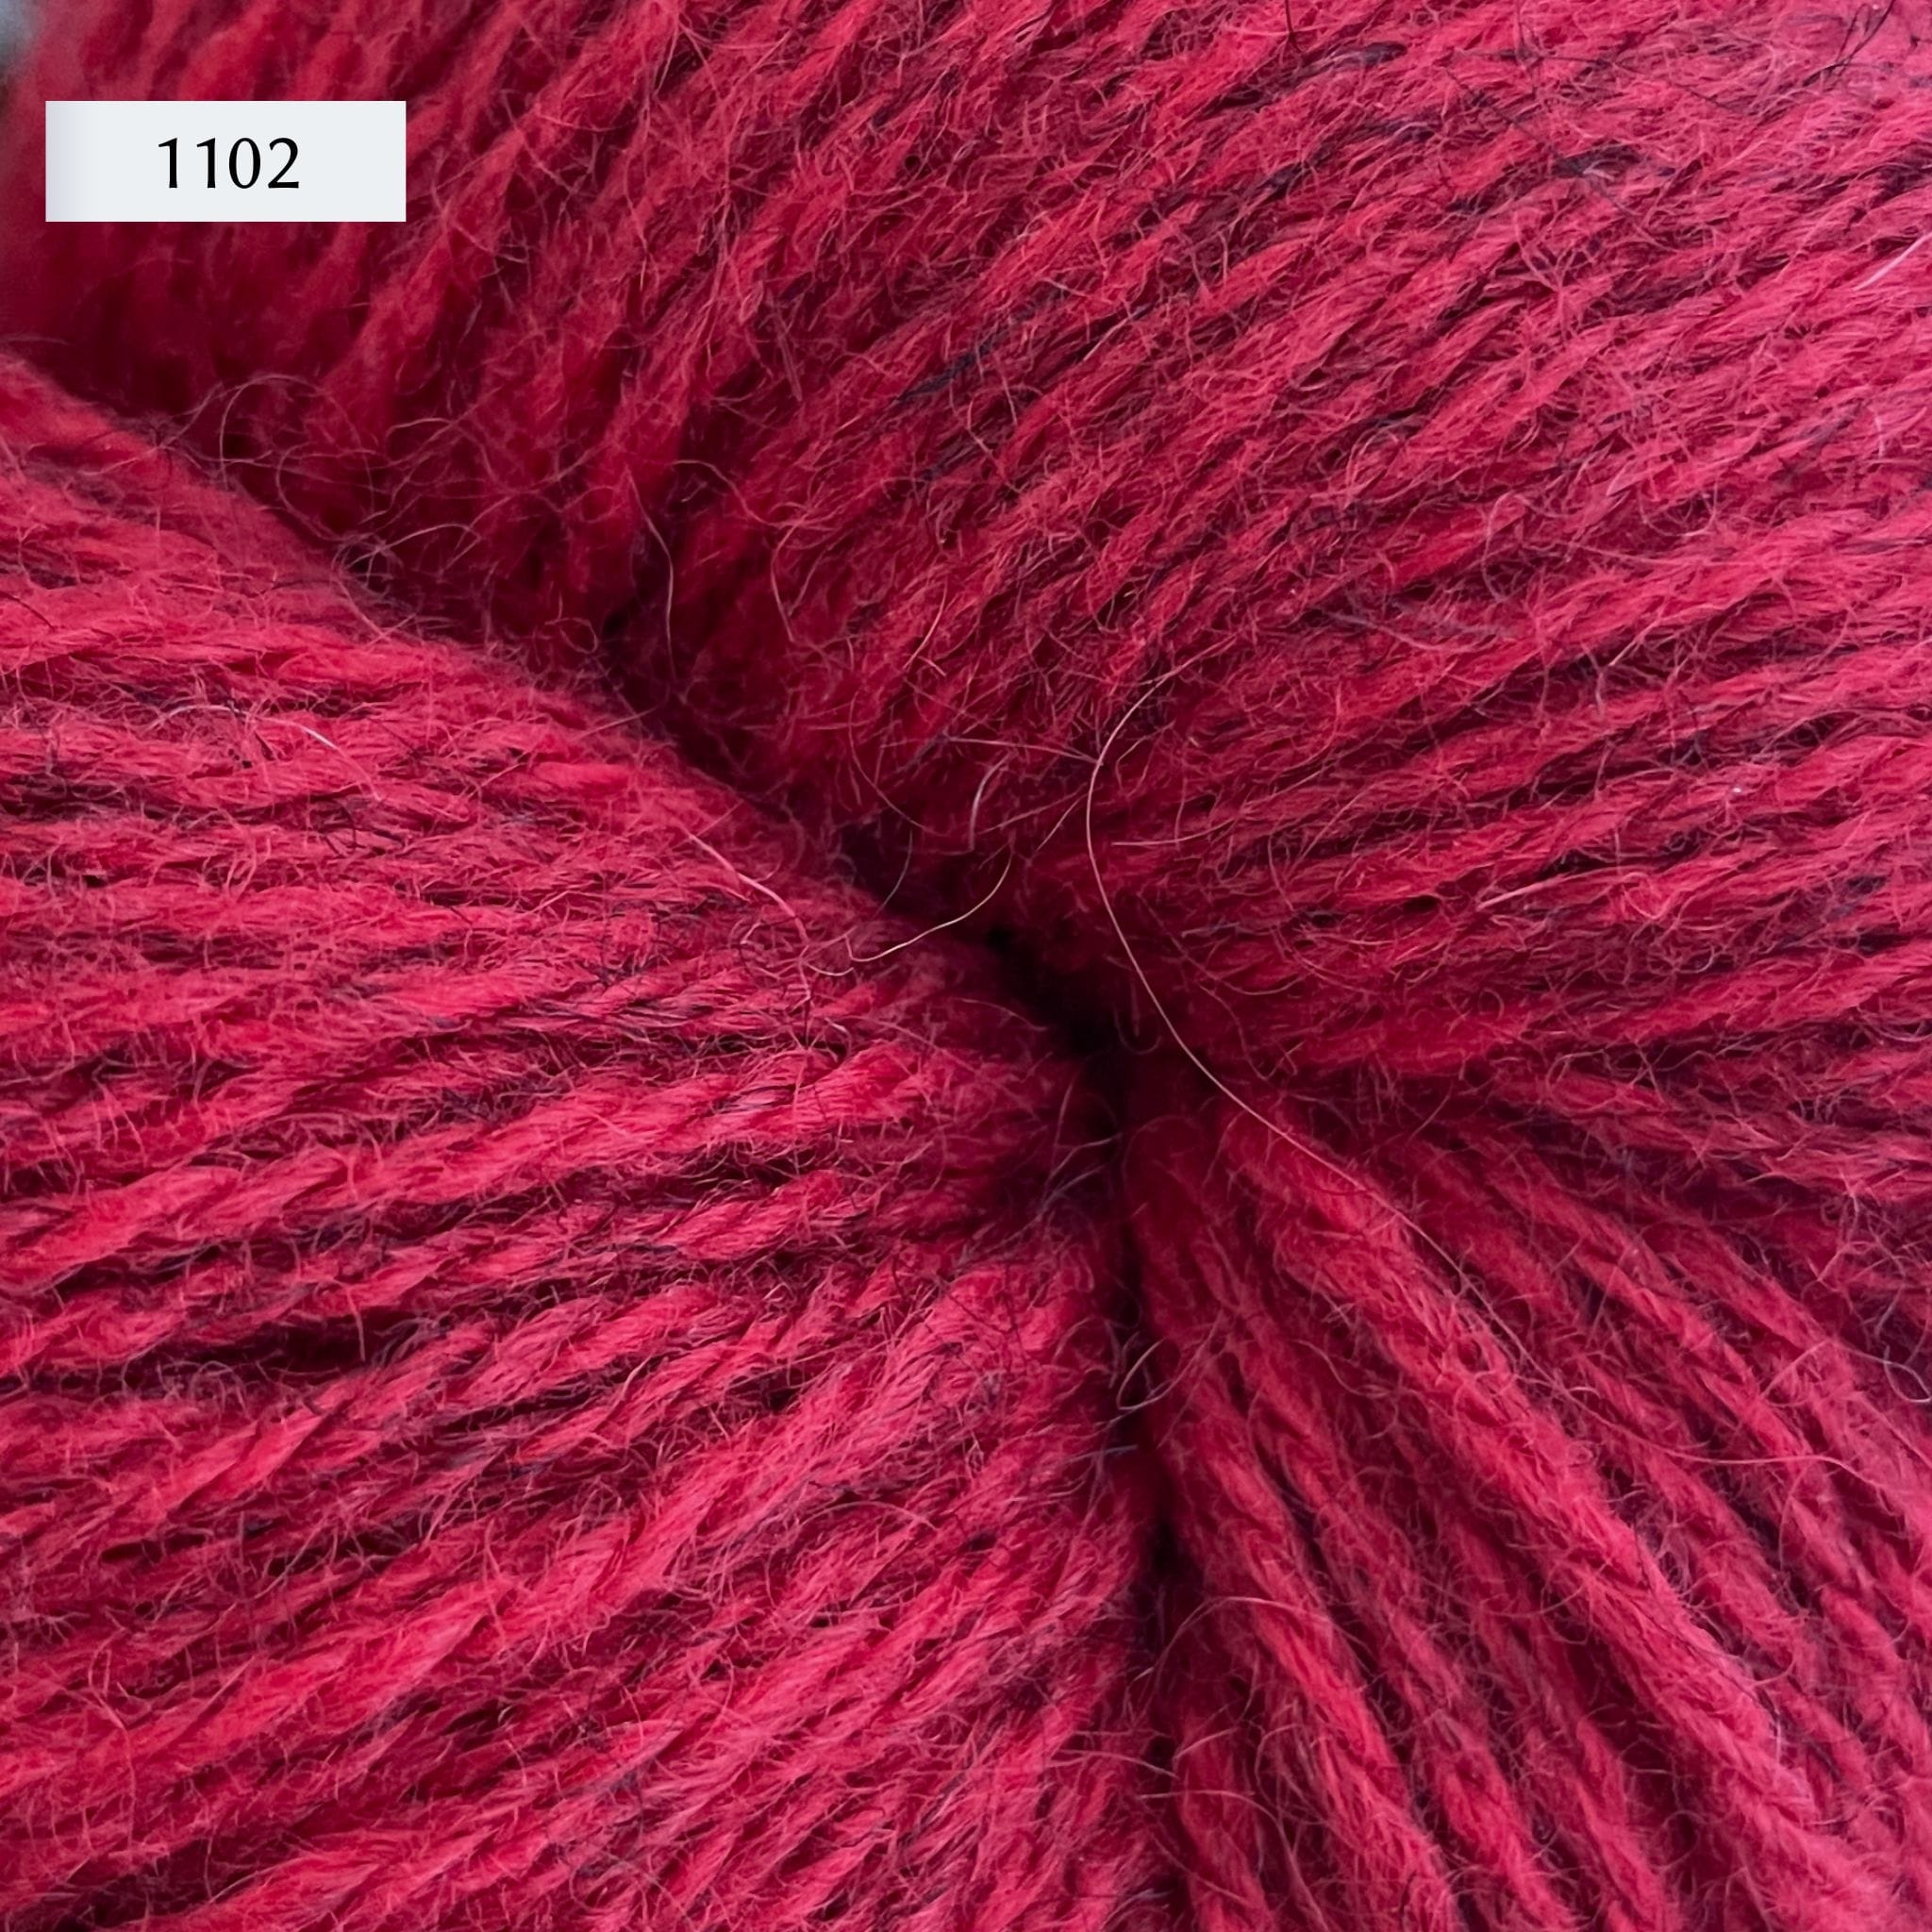 Ullcentrum 3ply, a worsted weight wool yarn, in color 1102, a heathered cherry red